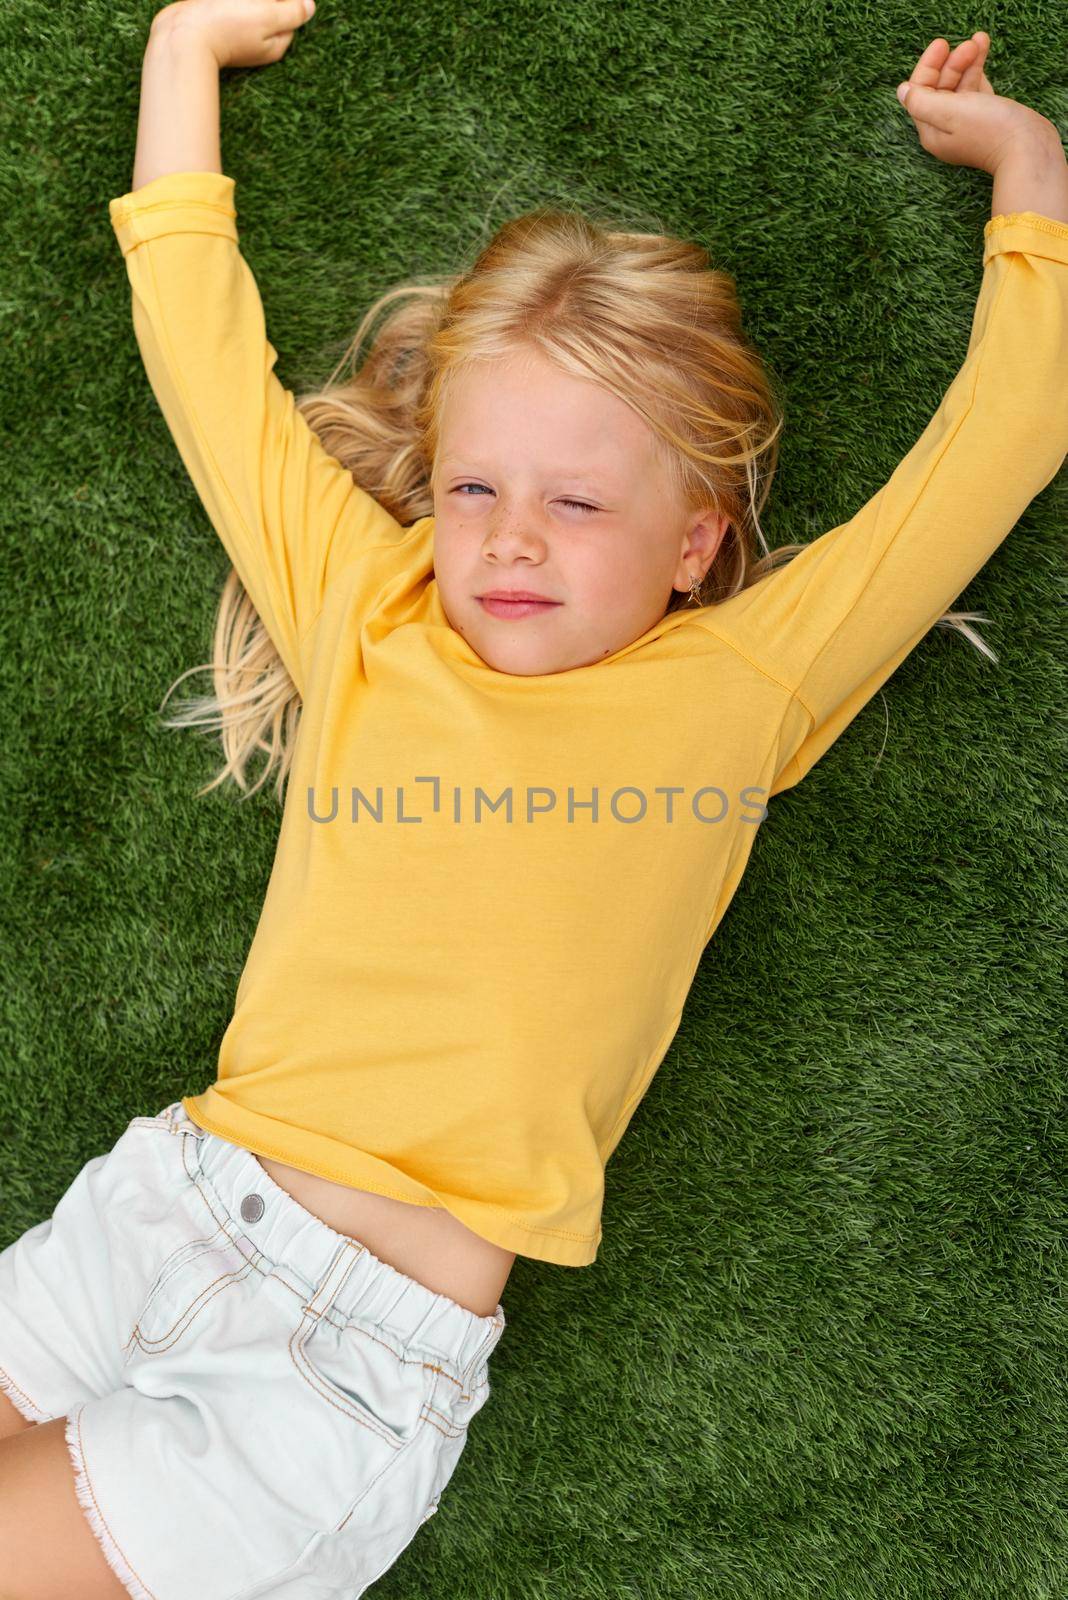 Top view. Mock up for logo, text, design. Blonde long hair child girl lying, stretching on green grass. Preschool girl 5-6 years old in yellow t shirt. Lifestyle Summer vacation Leisure. People